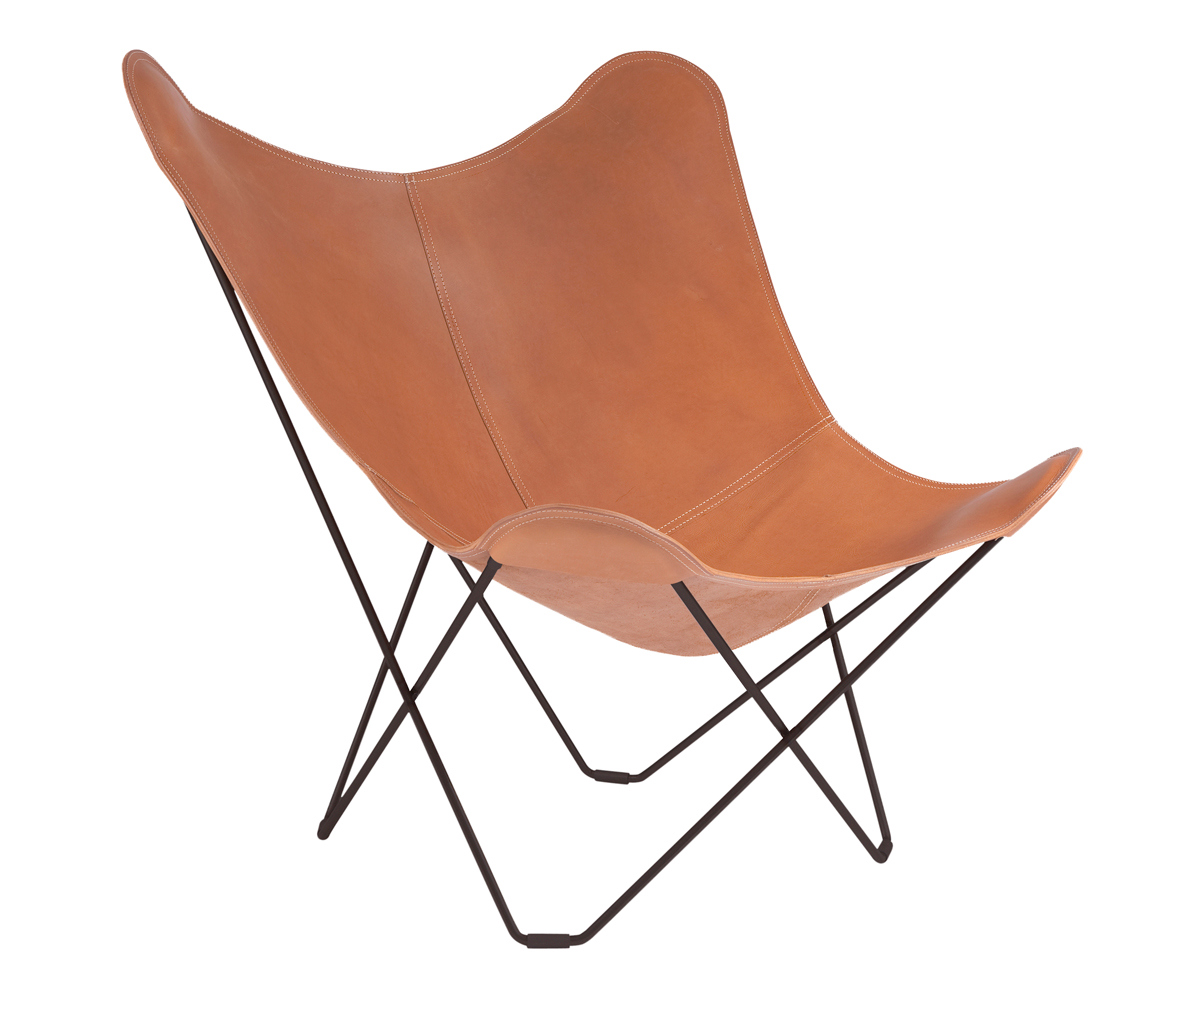 Cuero Design Mariposa Butterfly Chair Brown Leather